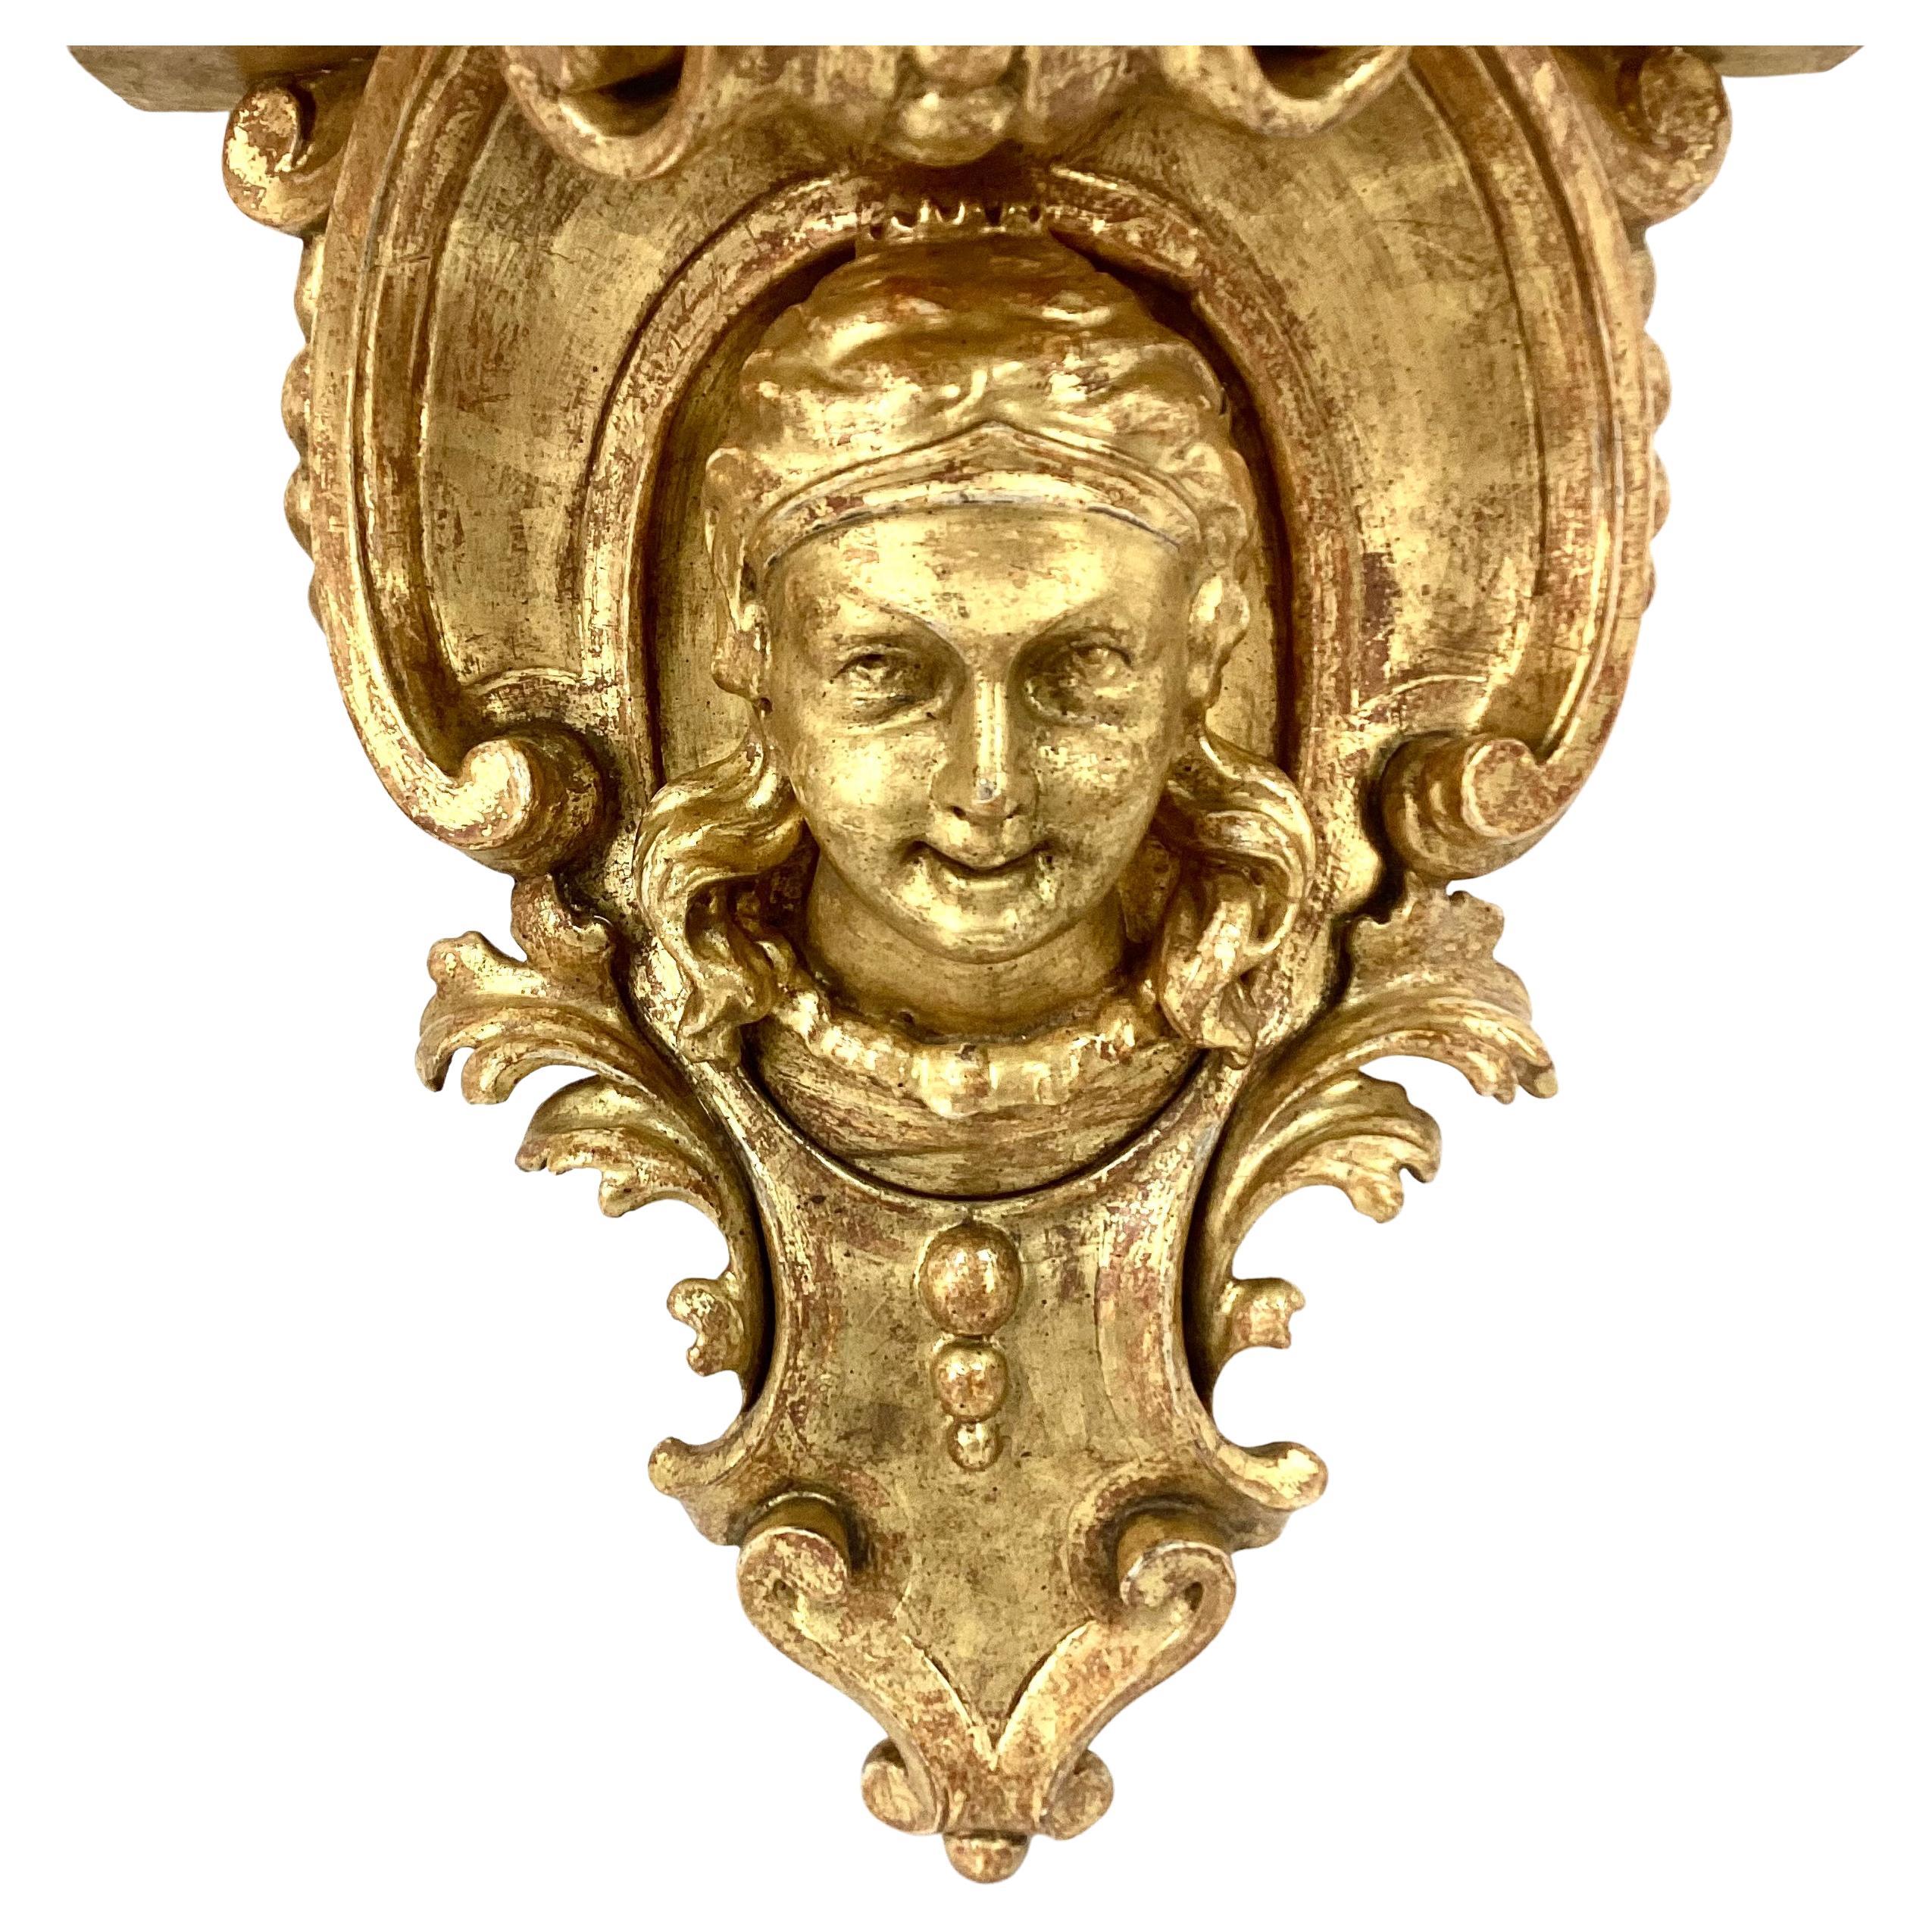 Unique pair of 19th century Italian baroque revival gilt wood wall brackets. A serpentine shelf lies over a c-scrolling foliate wall plate carved with 1) a maiden's bust and 2) a devil's bust. 